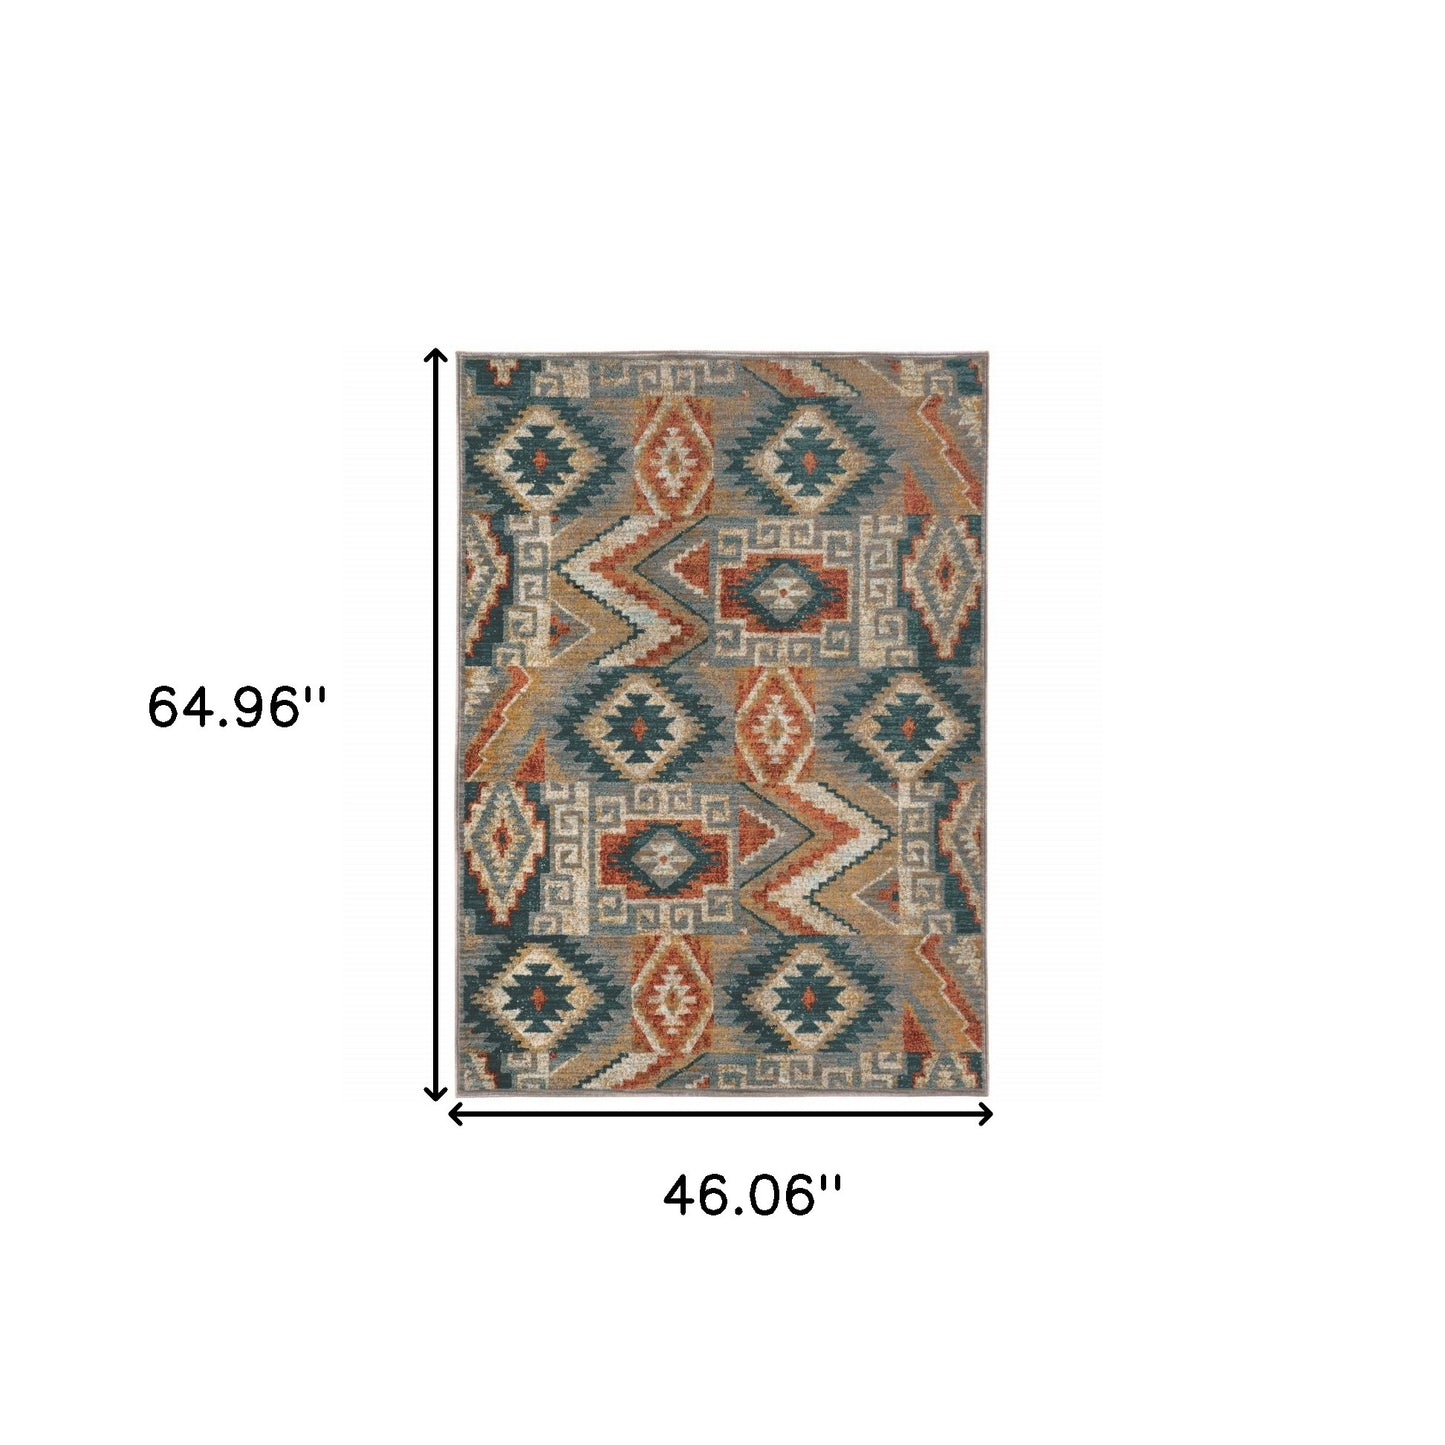 4' X 6' Blue Teal Grey Orange Gold Ivory And Rust Geometric Power Loom Stain Resistant Area Rug